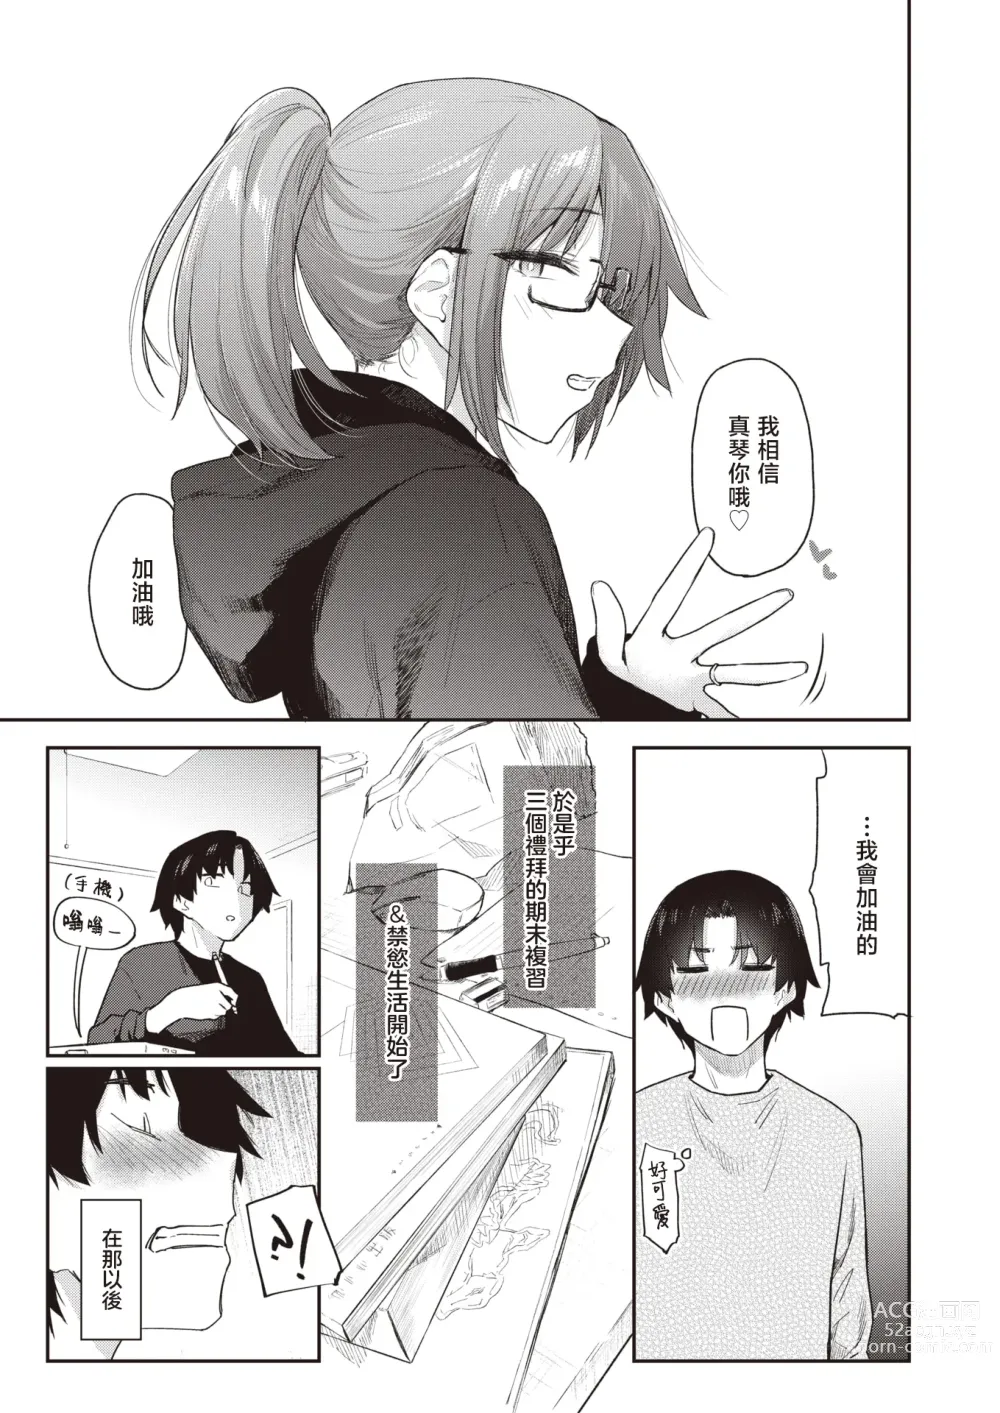 Page 9 of doujinshi 自用